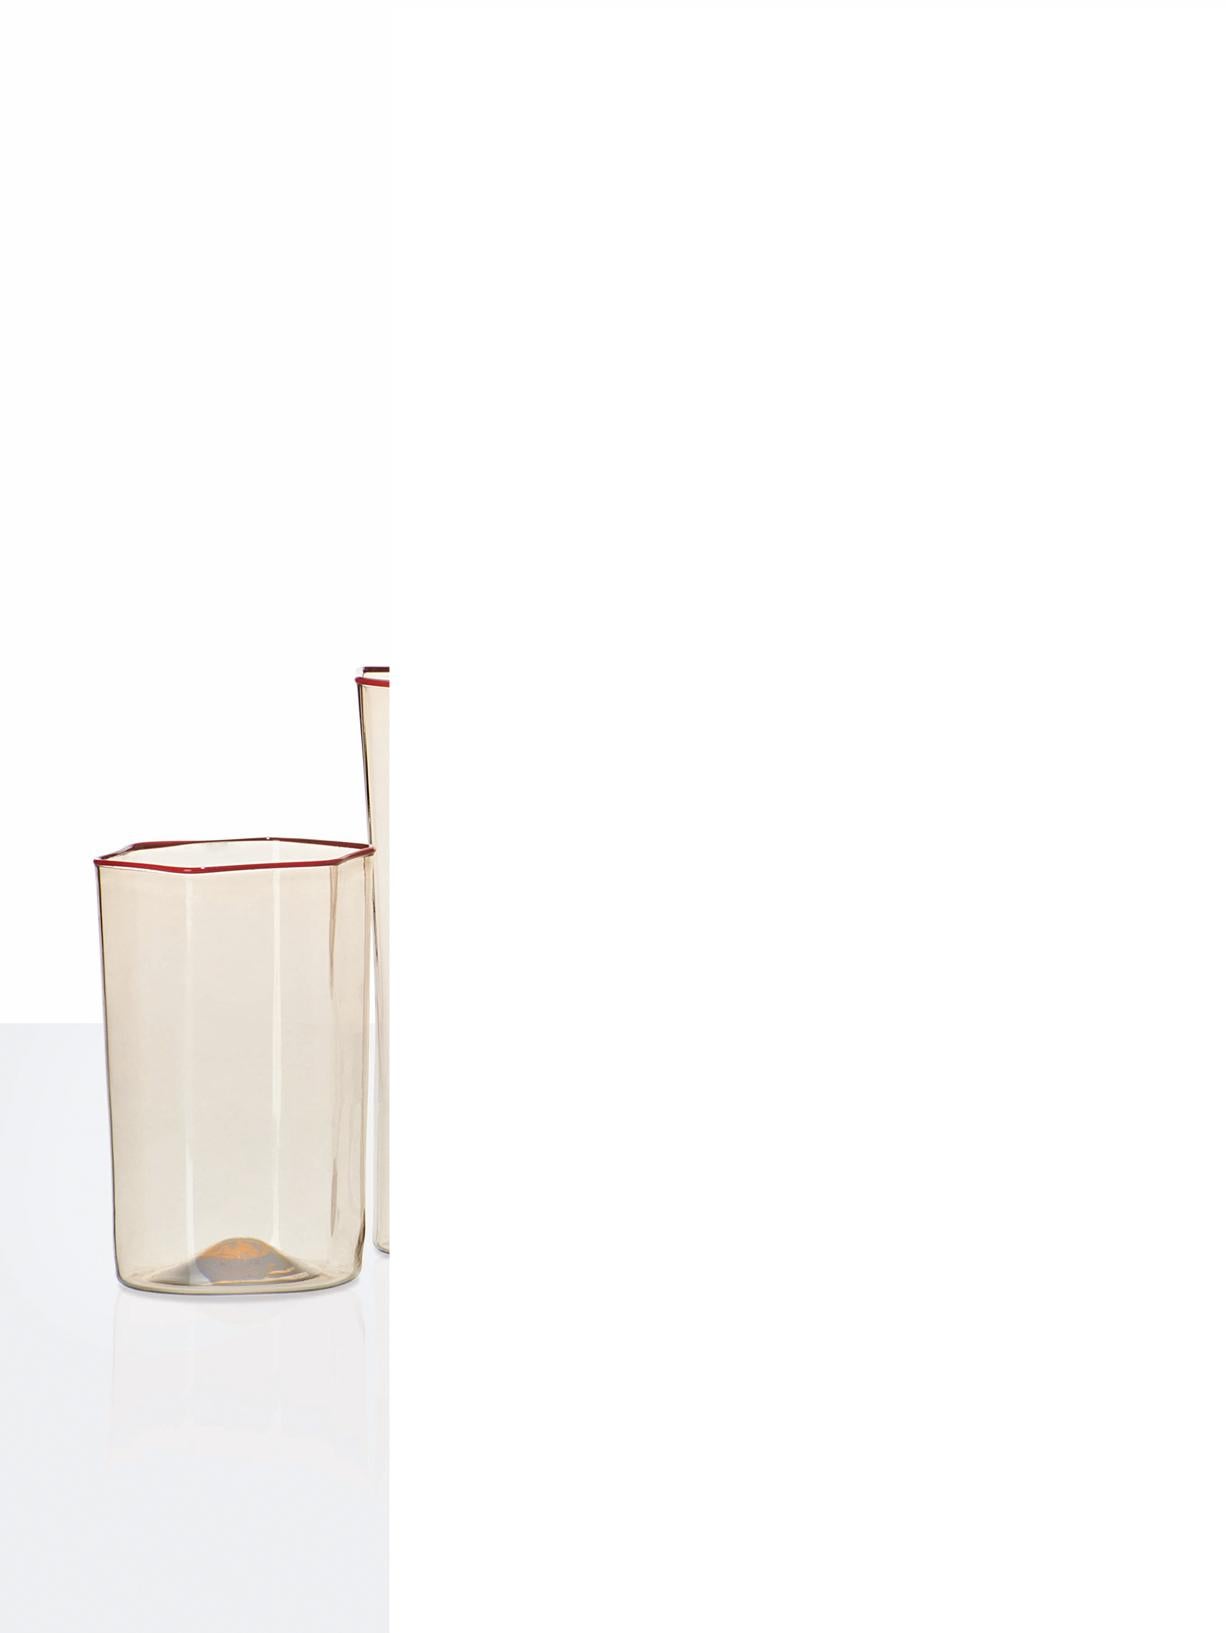 Esagonale glass glass collection, designed by Carlo Scarpa and manufactured by Venini, originally designed in 1932, consists of three glasses and a decanter. Esagonale Acqua / water: Ø 7.3 cm, H 10.5 cm

Other items available in the